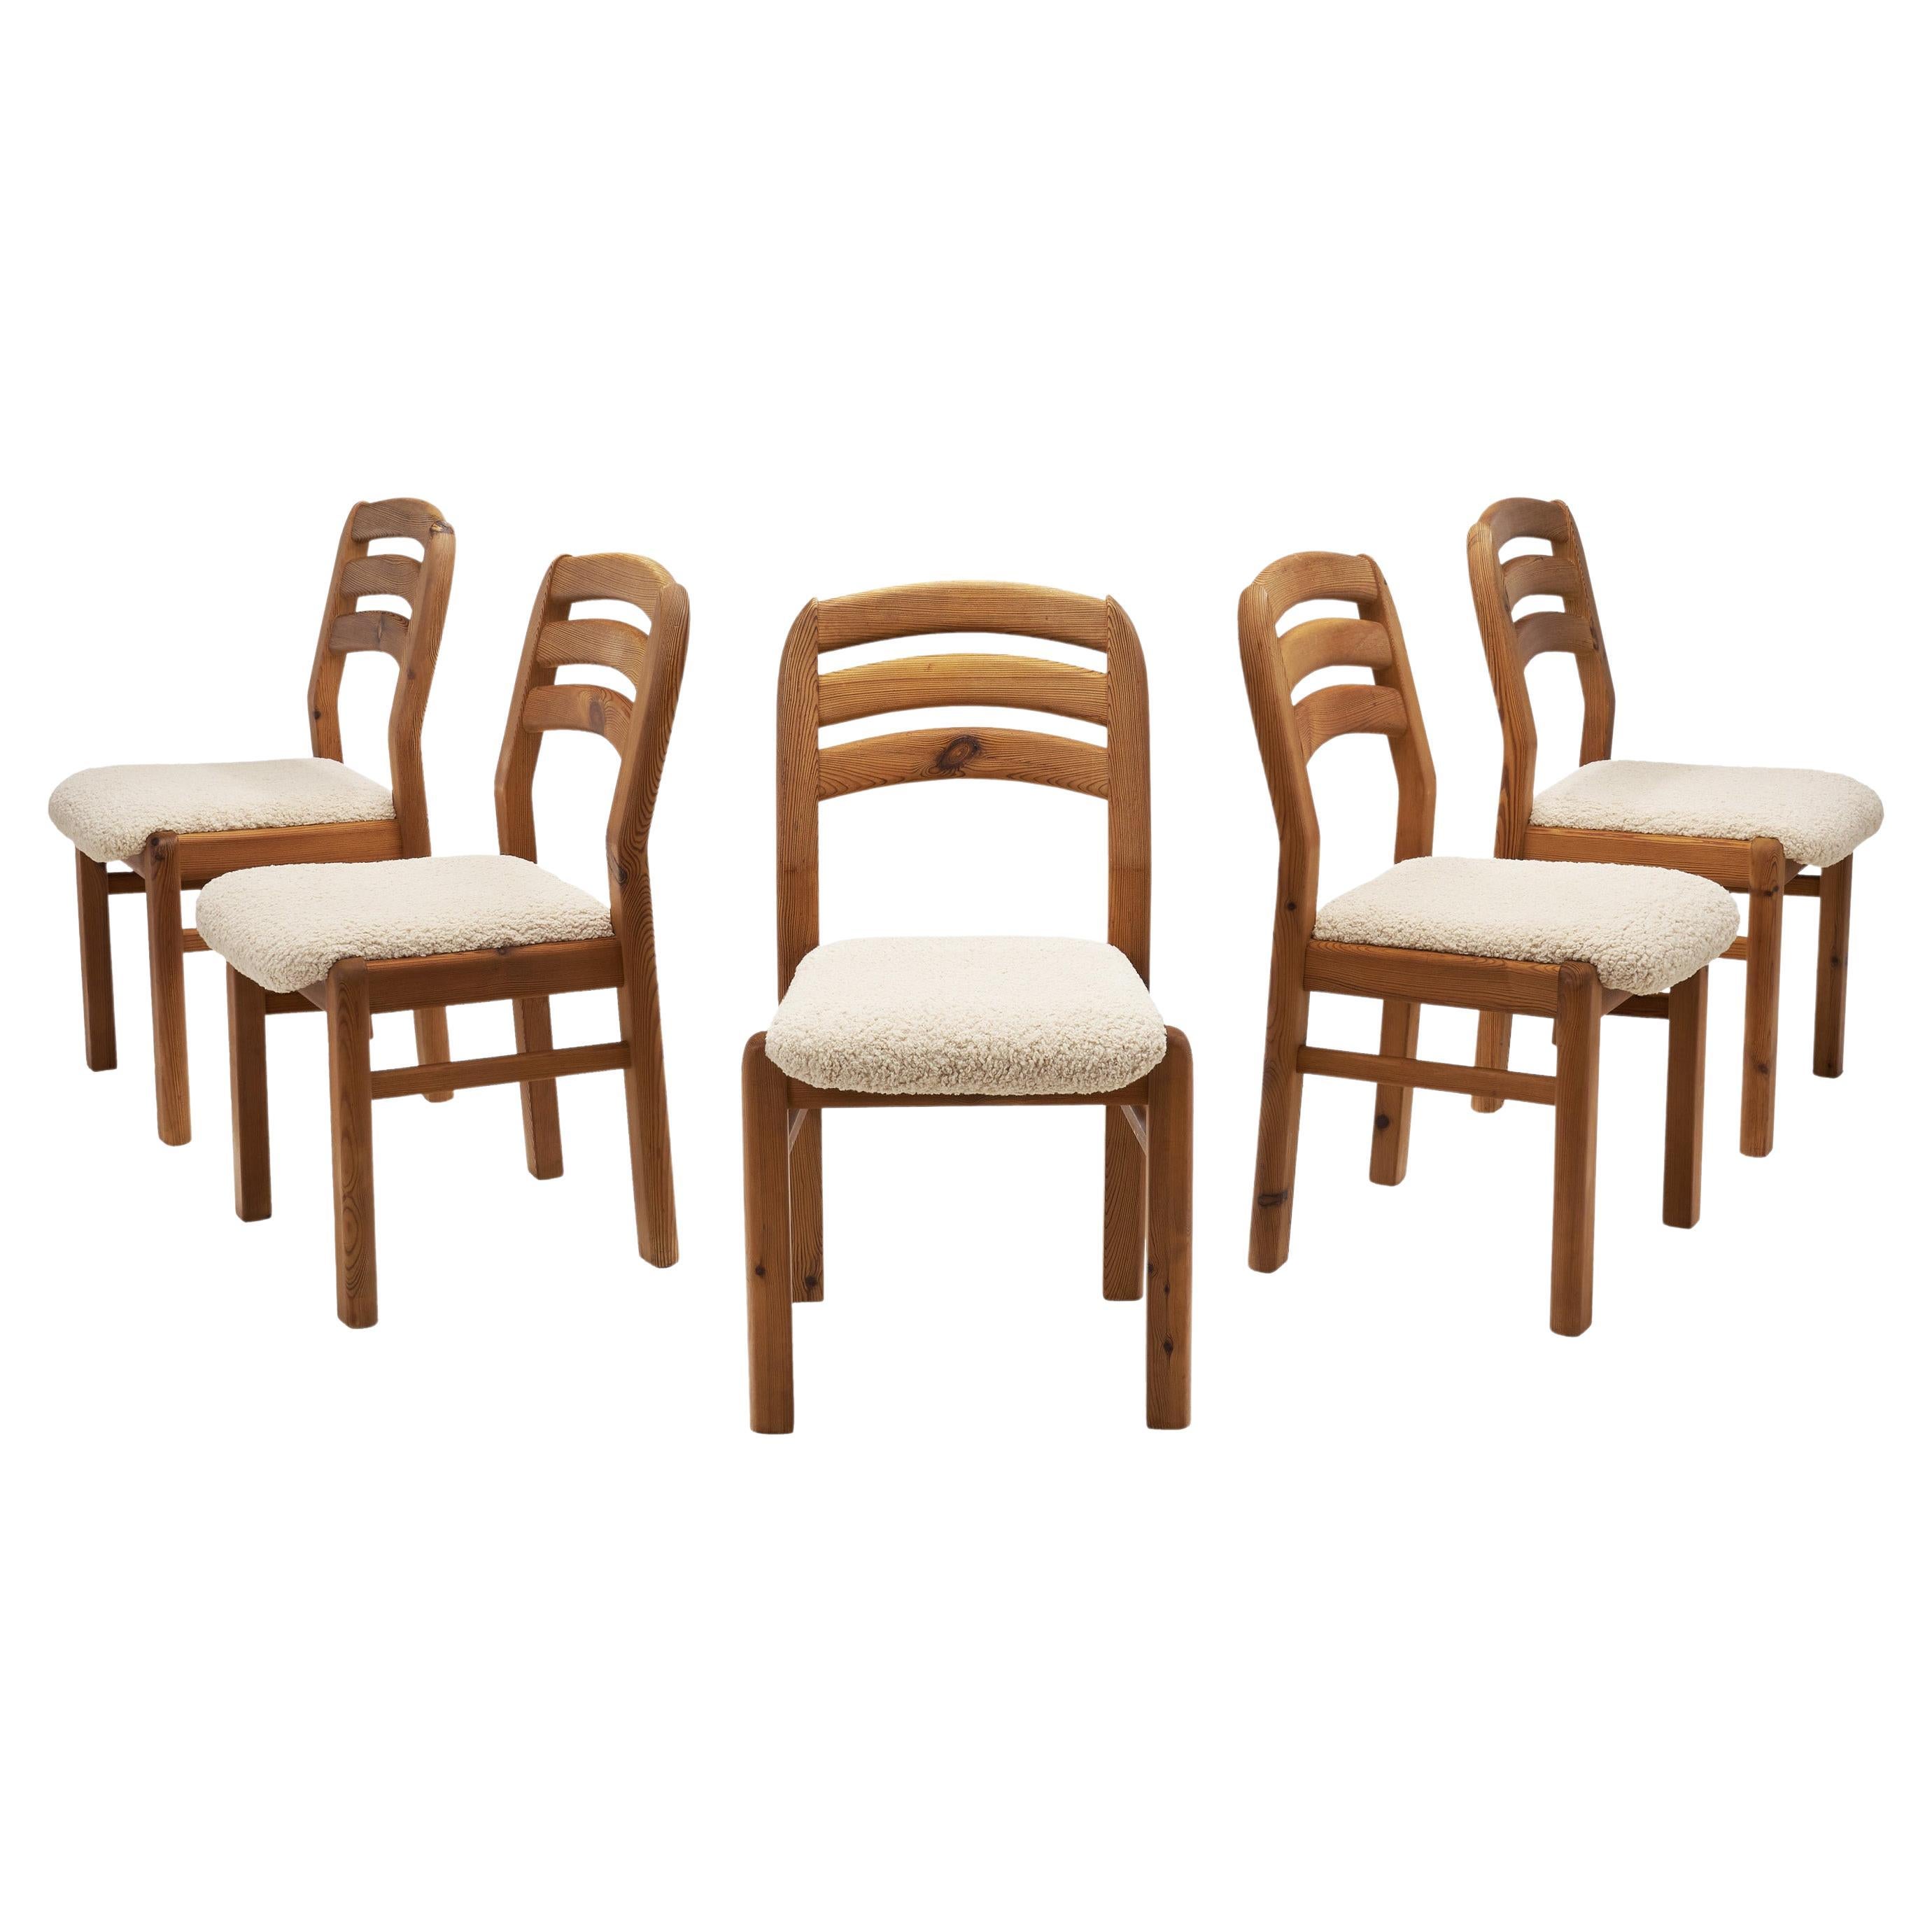 https://a.1stdibscdn.com/scandinavian-pine-dining-chairs-with-upholstered-seats-scandinavia-1990s-for-sale/f_29473/f_348381421687166853079/f_34838142_1687166853917_bg_processed.jpg